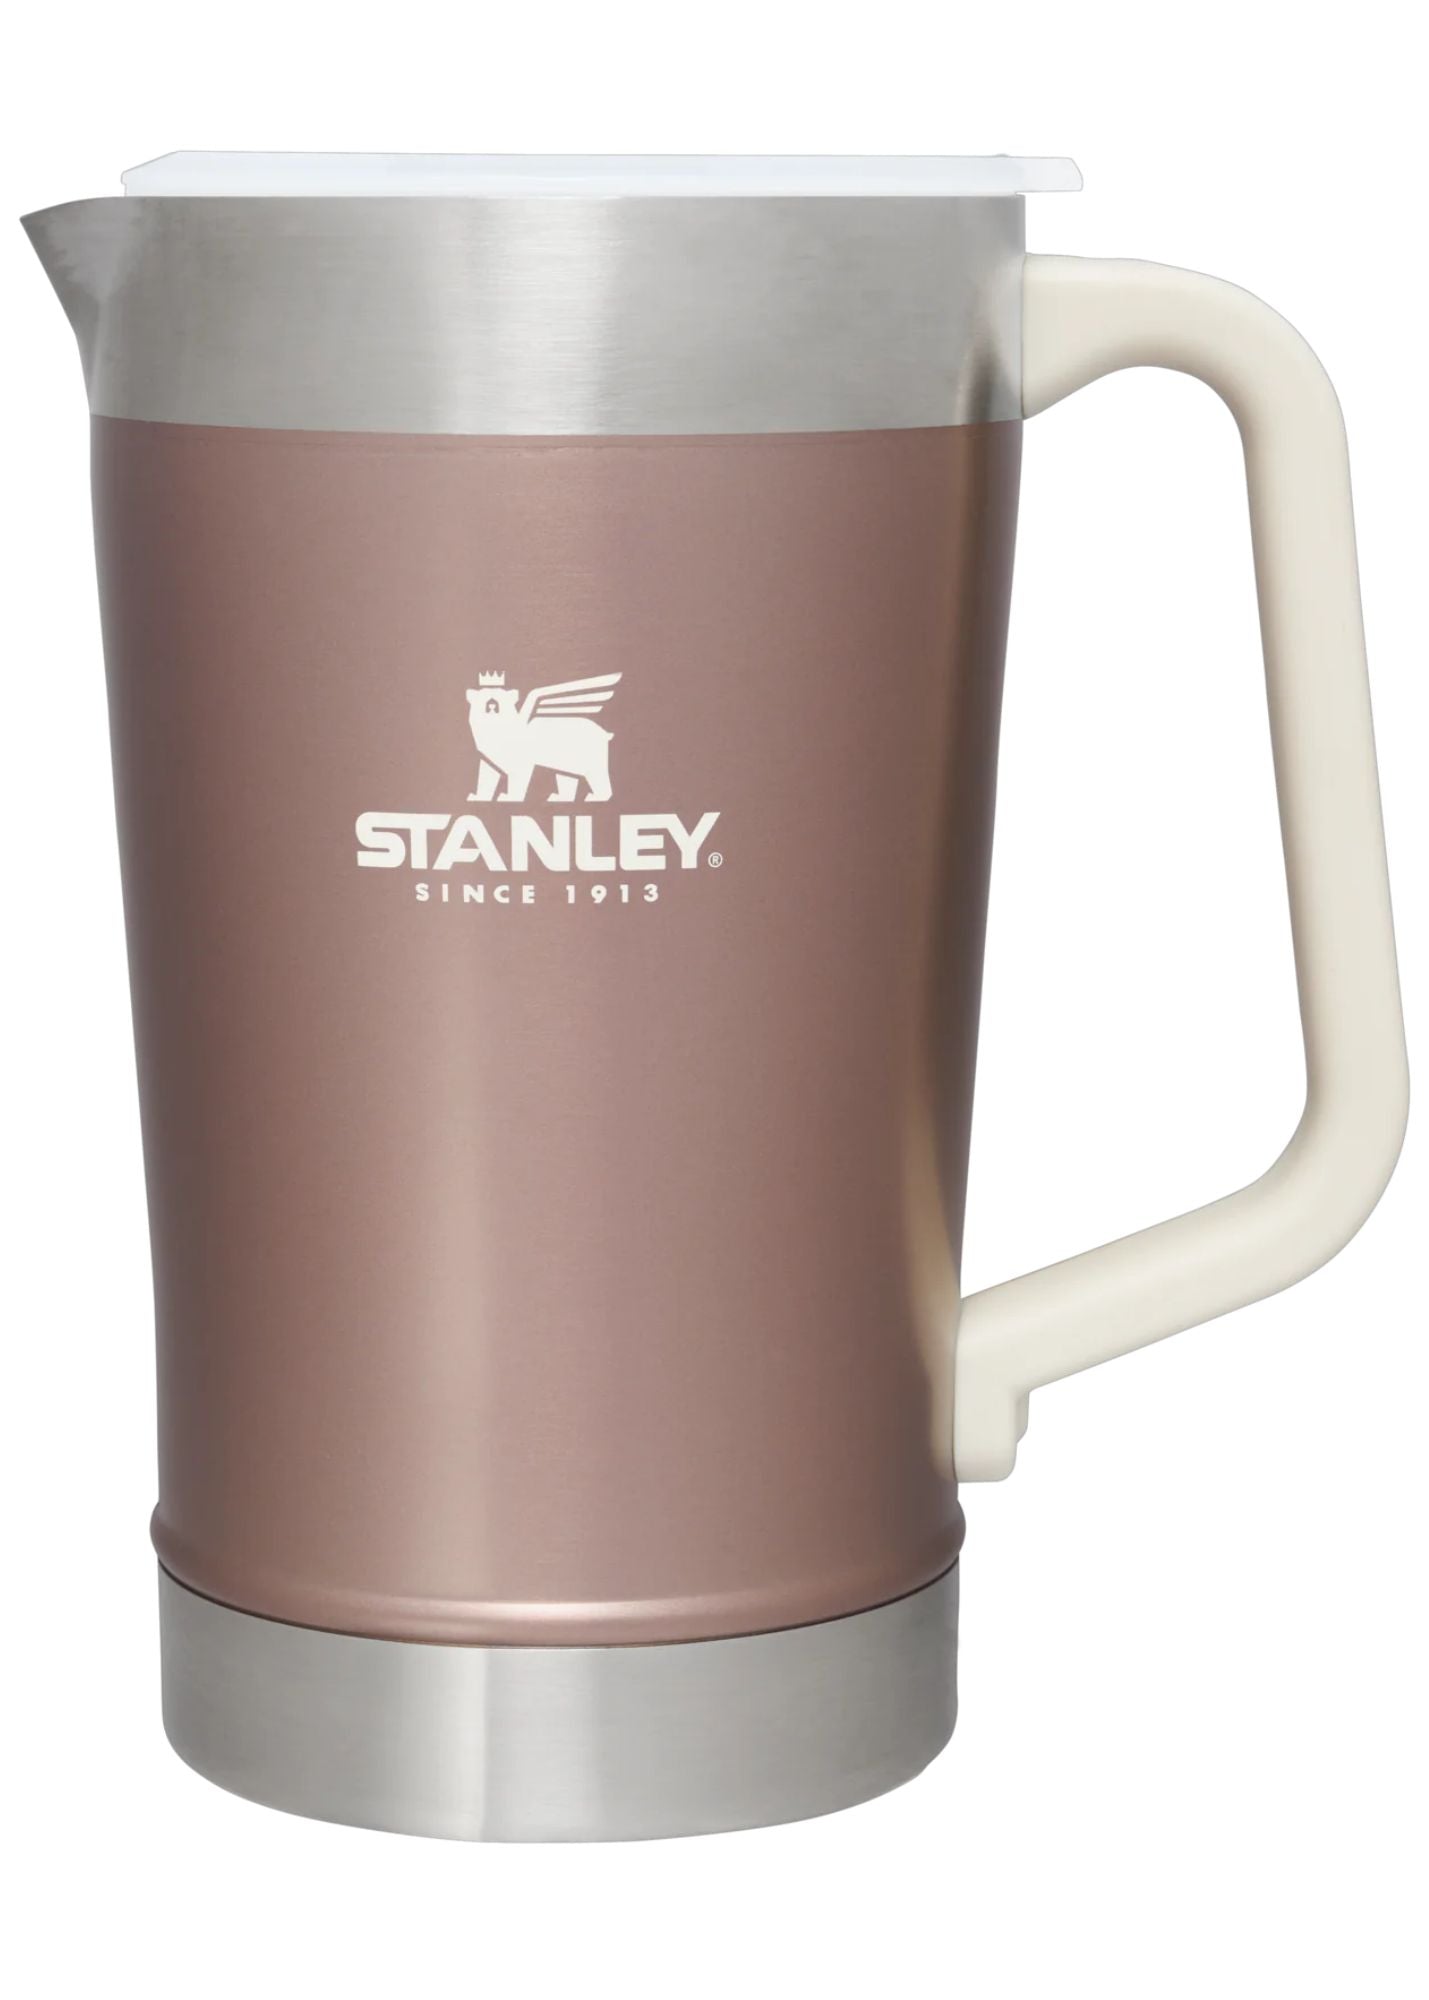 The Famous Stanley Tumbler Comes in a 64 oz Size to Keep You